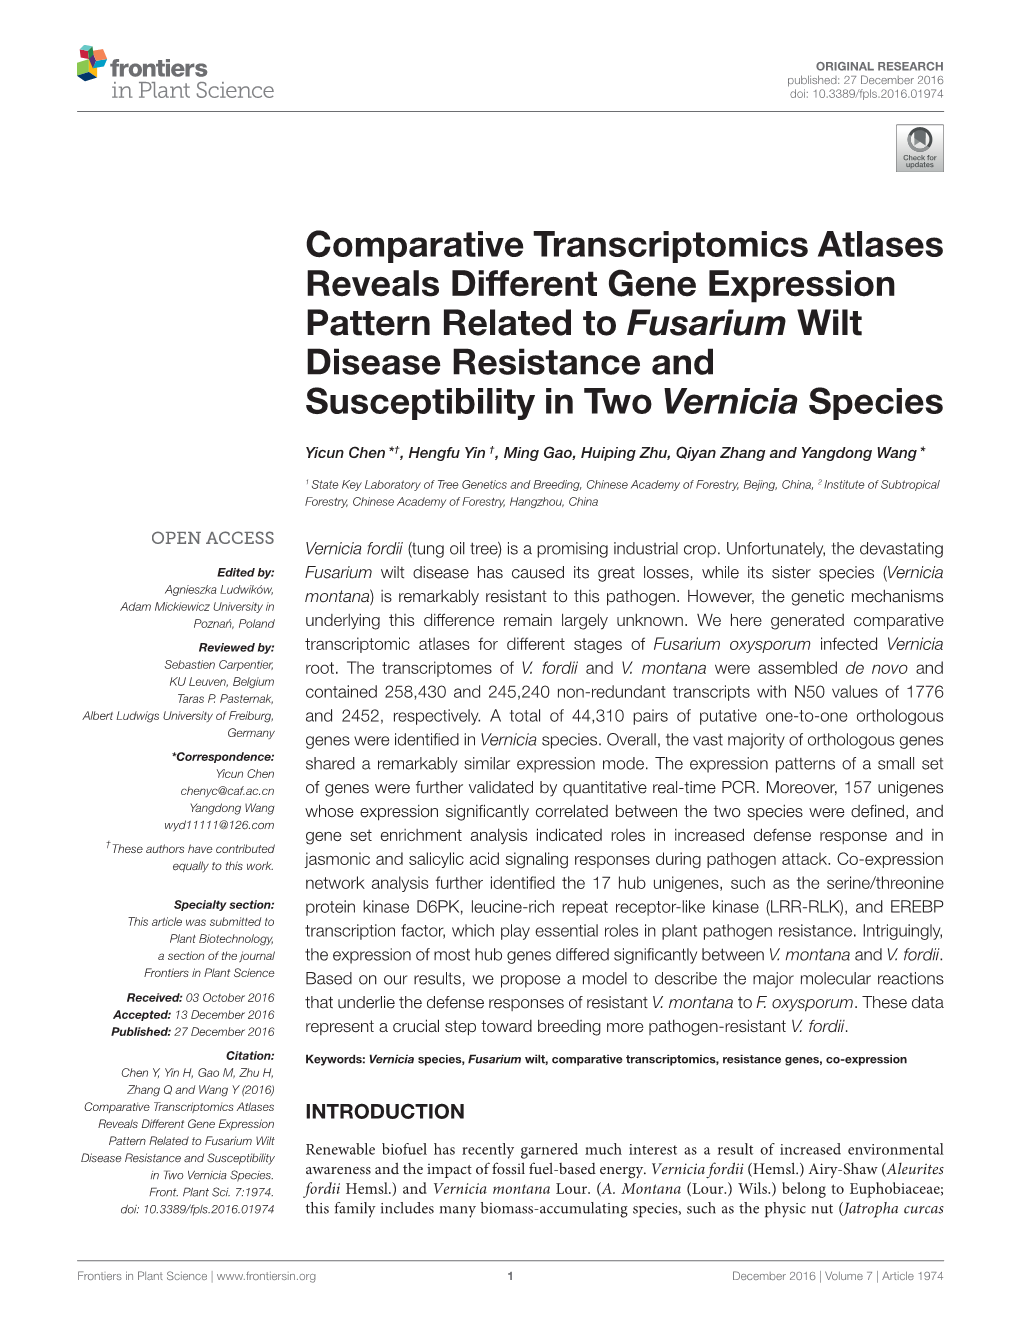 Comparative Transcriptomics Atlases Reveals Different Gene Expression Pattern Related to Fusarium Wilt Disease Resistance and Susceptibility in Two Vernicia Species